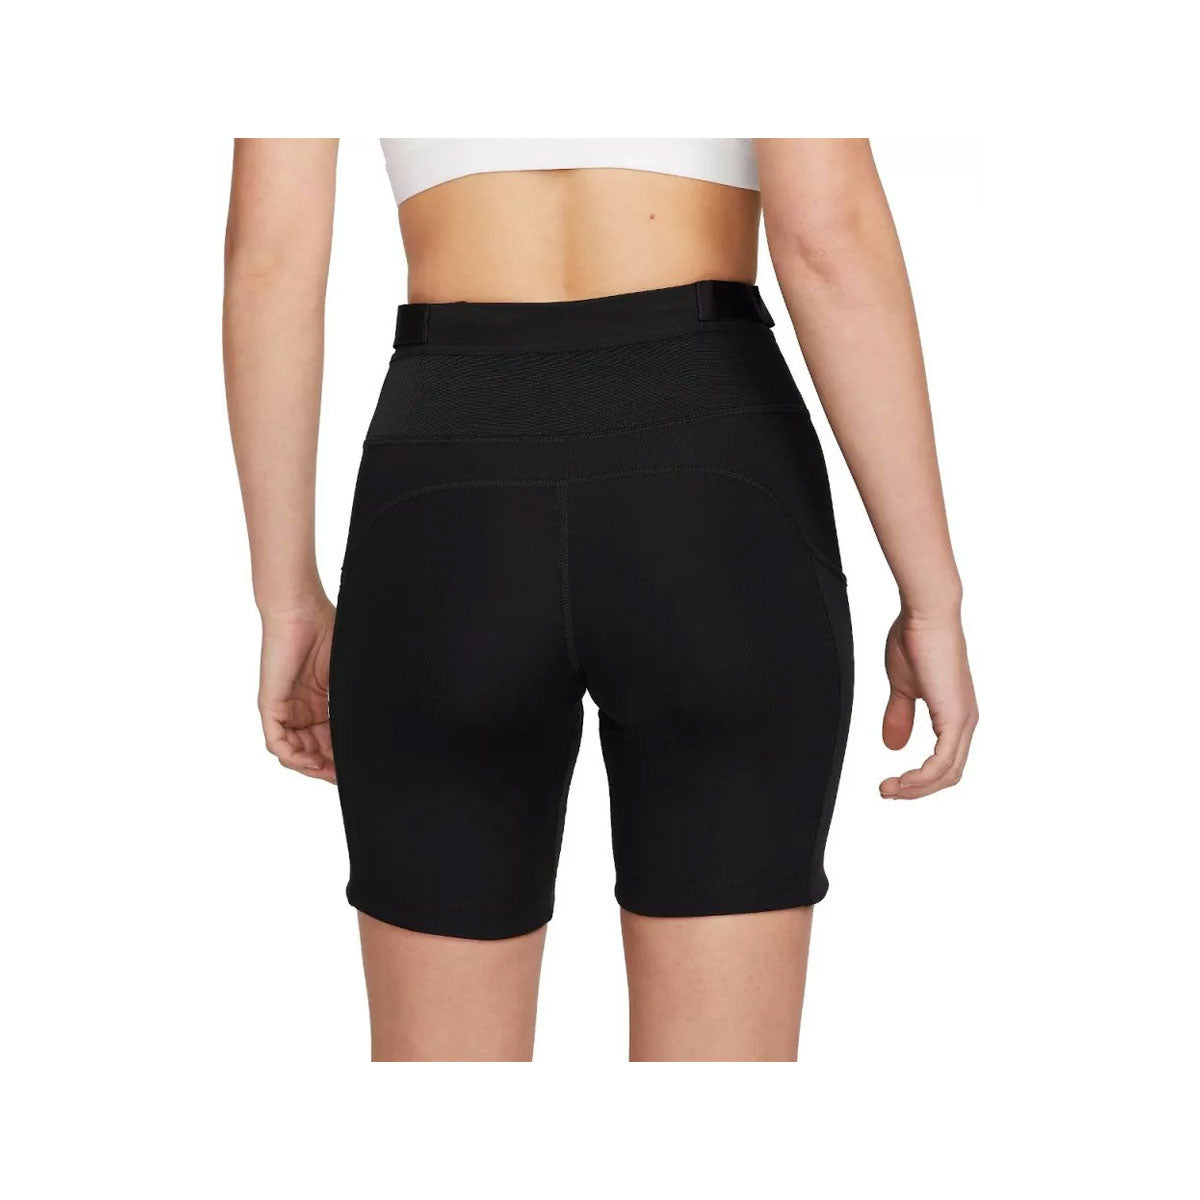 Nike Women's Epic Luxe Trail Tight Shorts - KickzStore